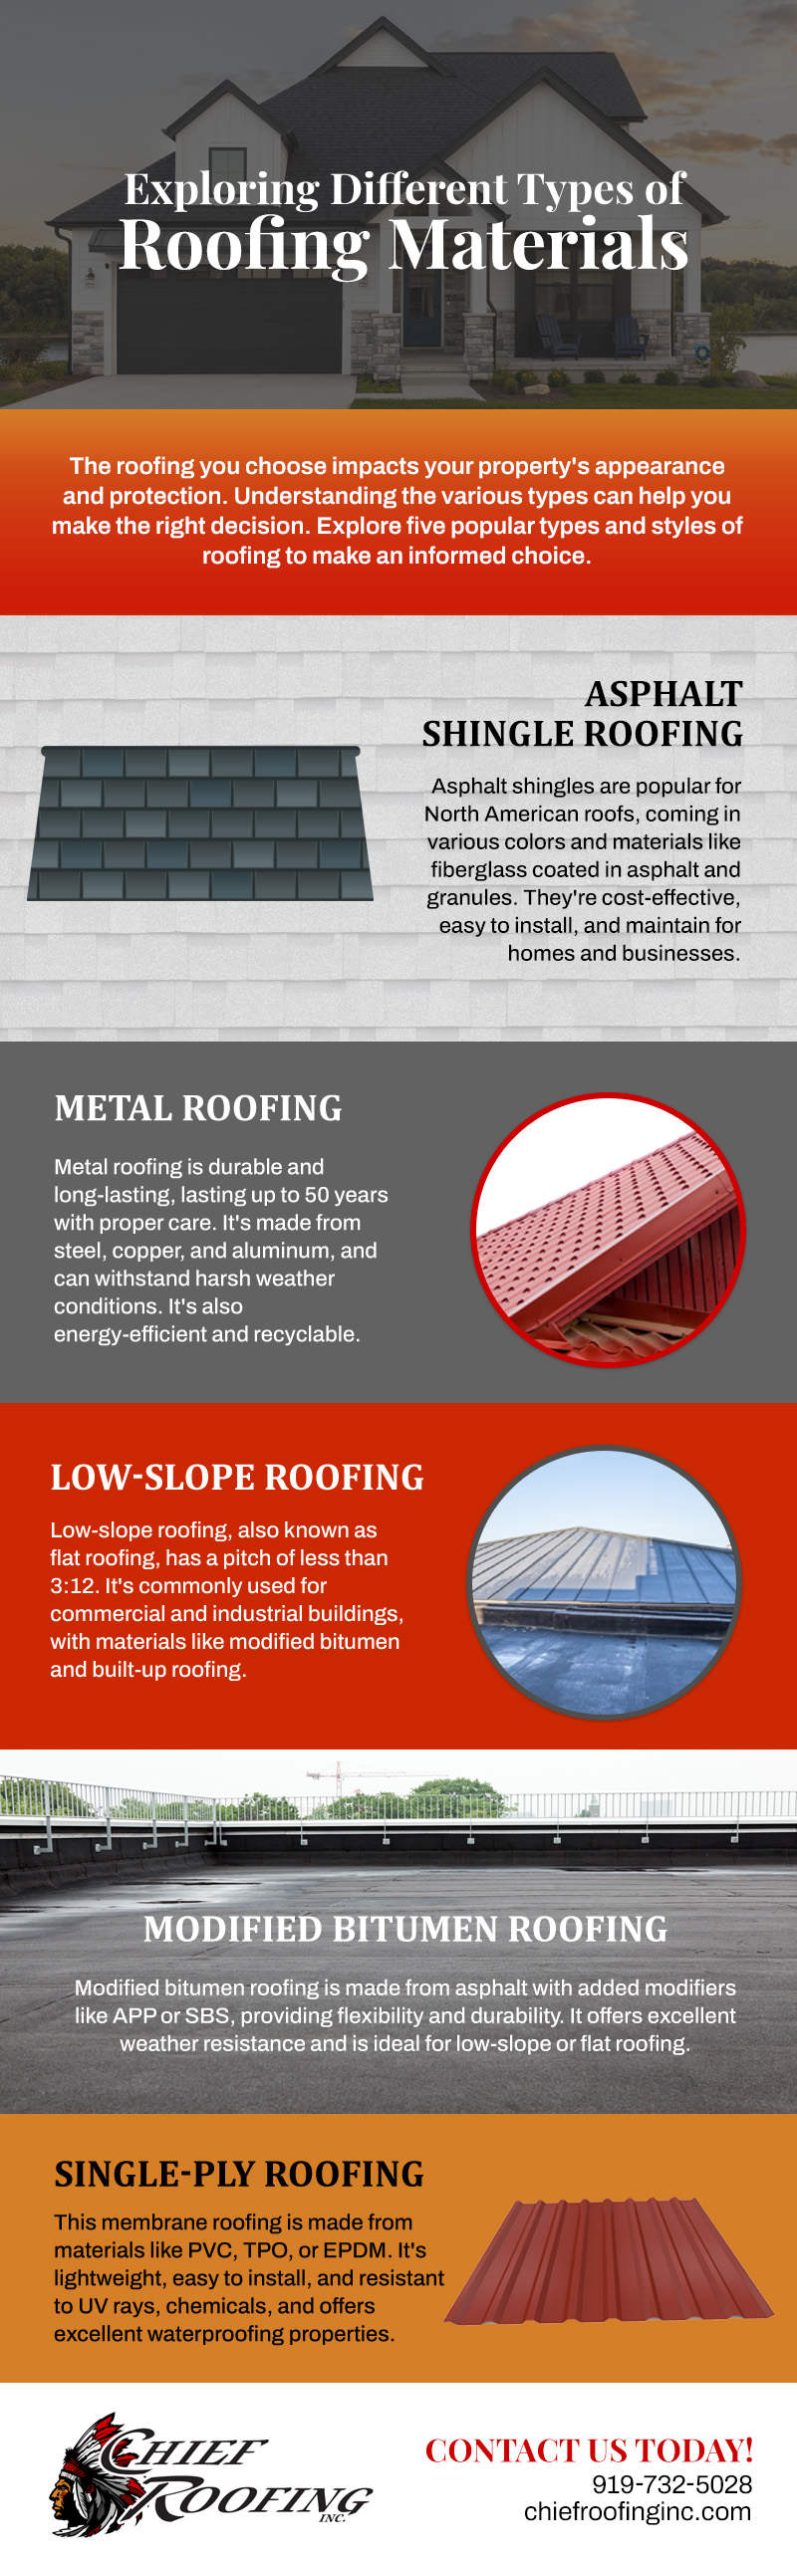 Exploring Different Types of Roofing Materials